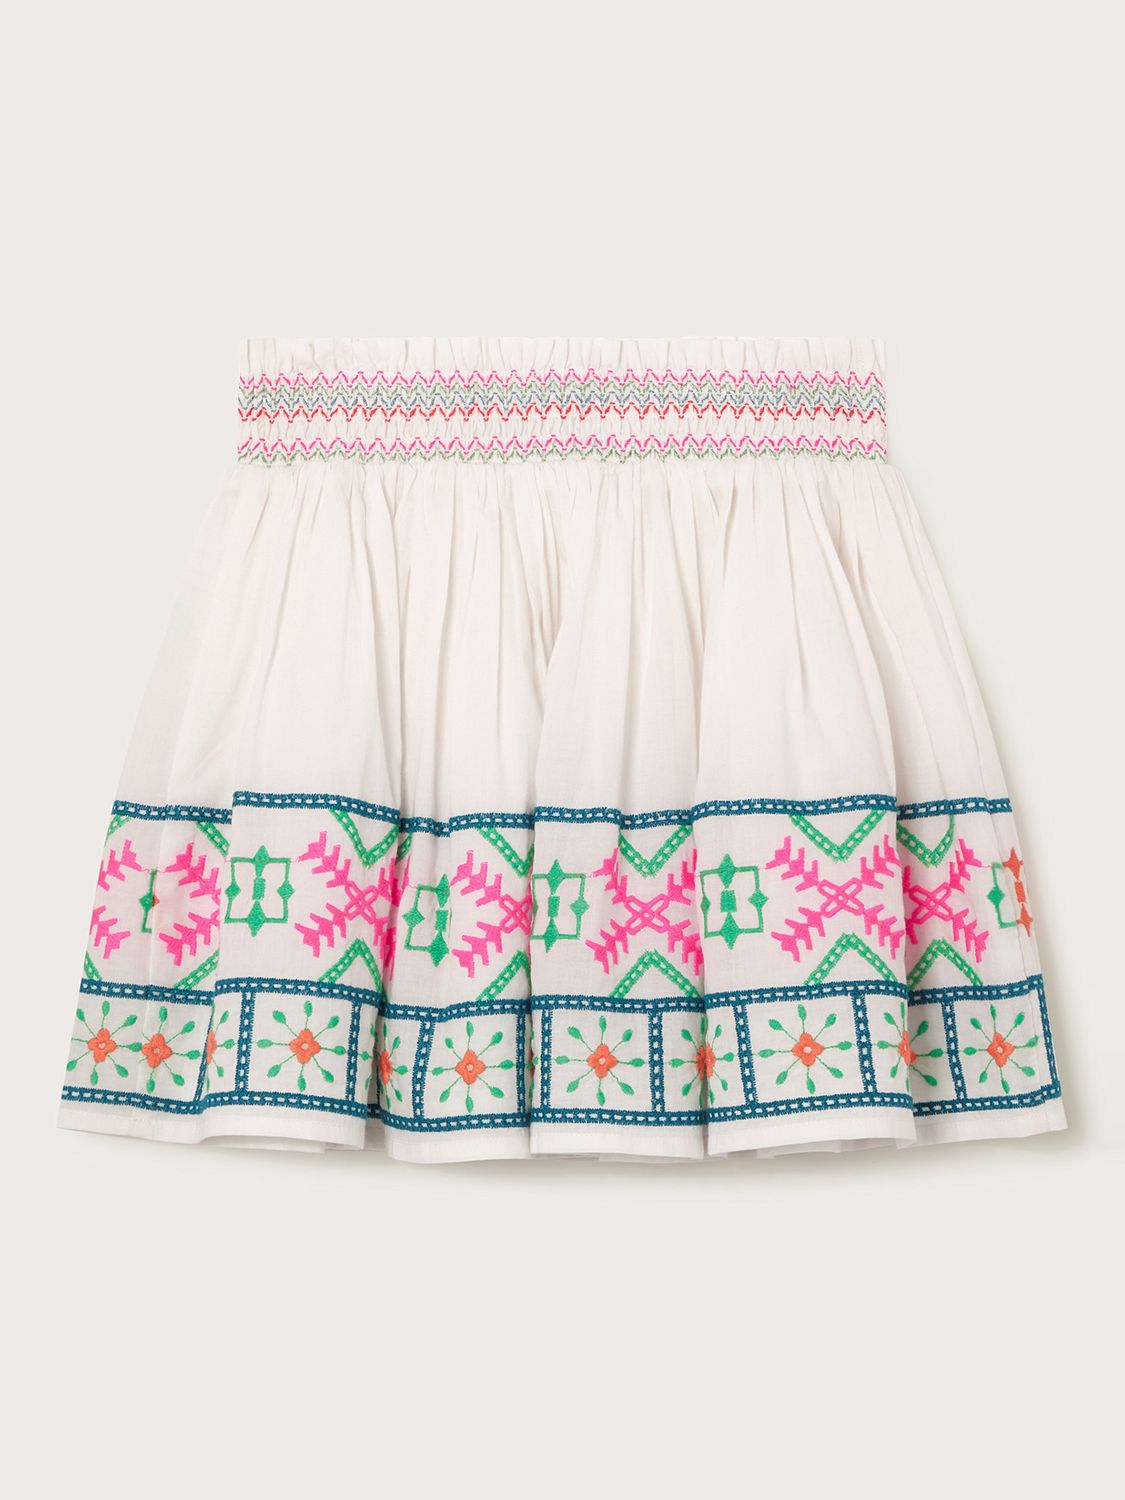 Monsoon Kids' Tropical Embroidered Skirt, White/Multi, 3-4 years